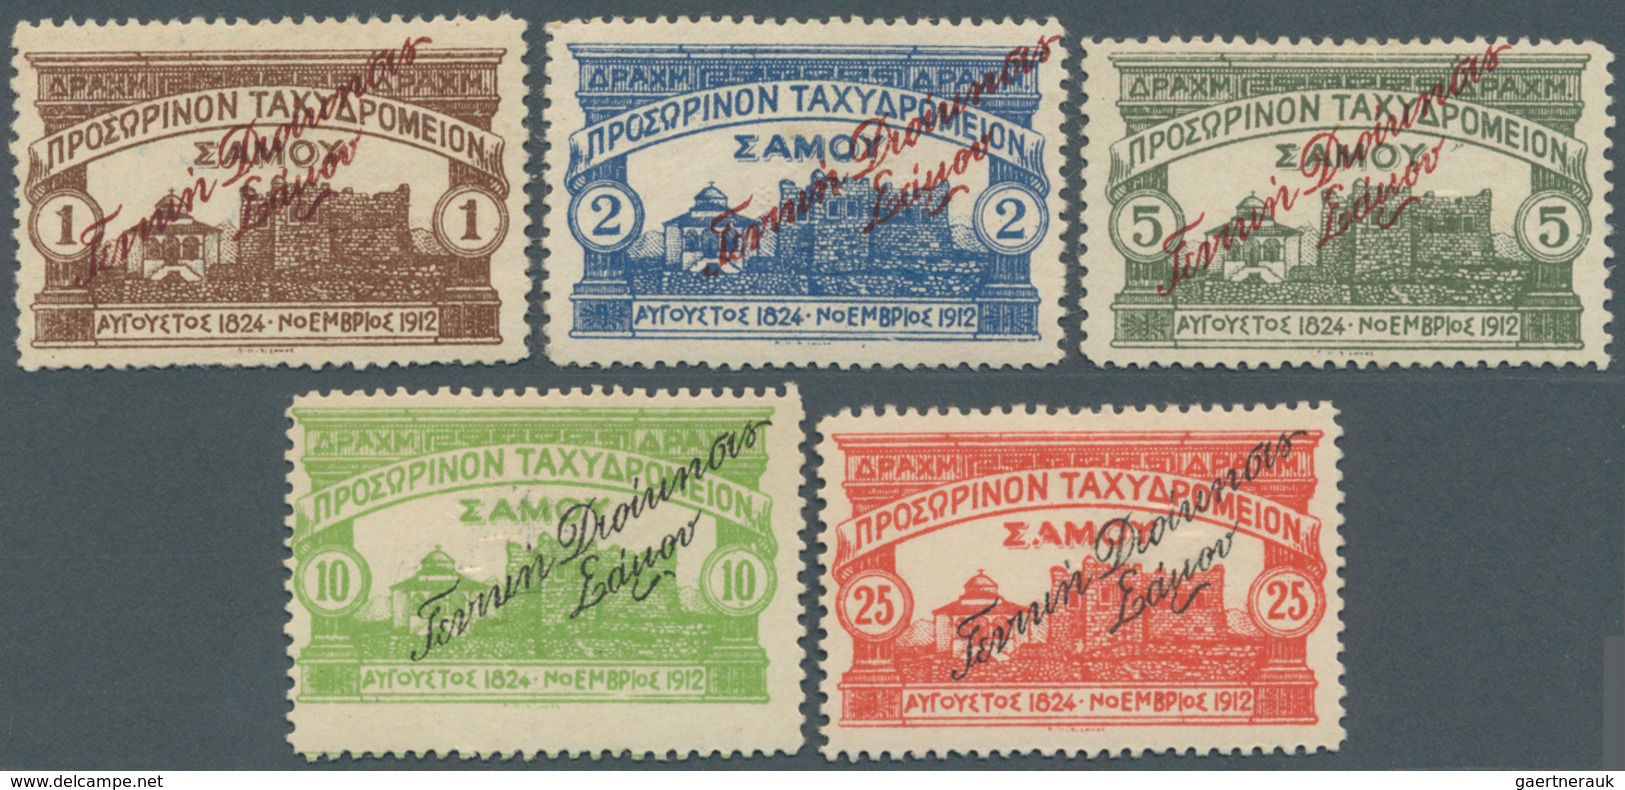 Samos: 1915. Vathy Hospital Fund. Fine Mint Set SG 32 To SG 36, 25l Red. Scarce Mint Set. Signed. - Local Post Stamps